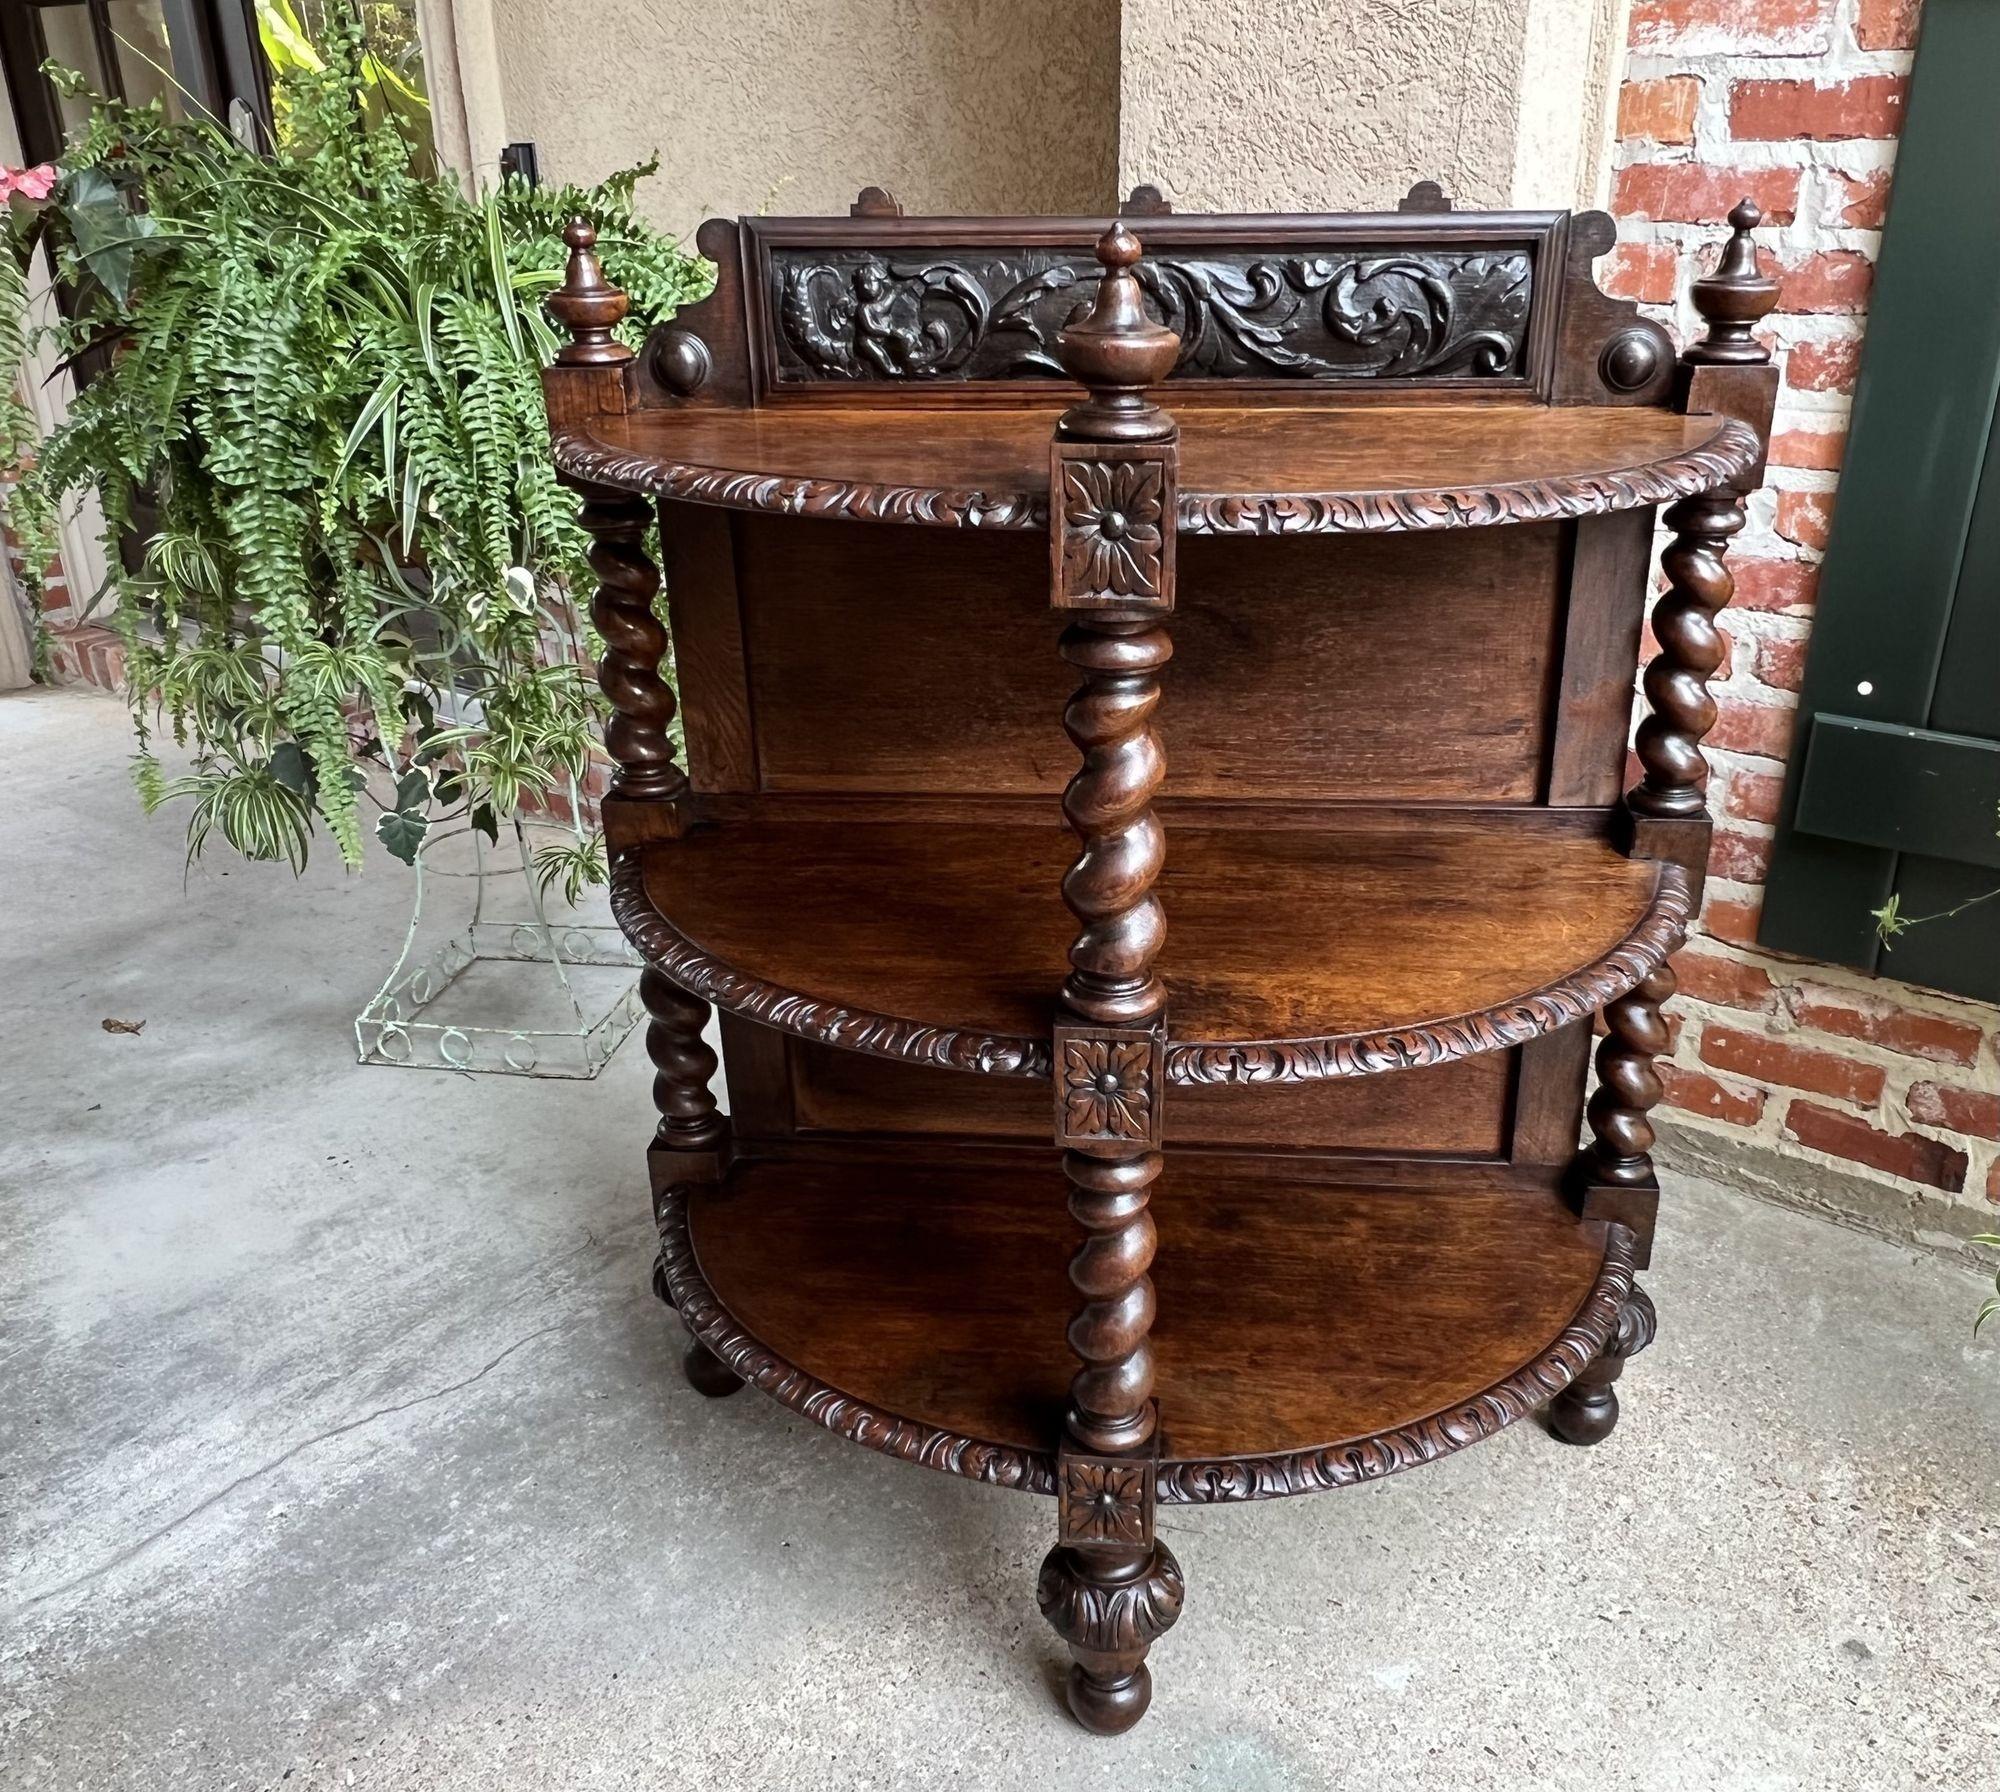 19th century French Demilune table bookcase barley twist carved oak Louis XIII.
 
Direct from France, a very special, highly carved, 19th century French demilune table/server/bookcase shelf! 
Oversized barley twist posts on the front and sides frame